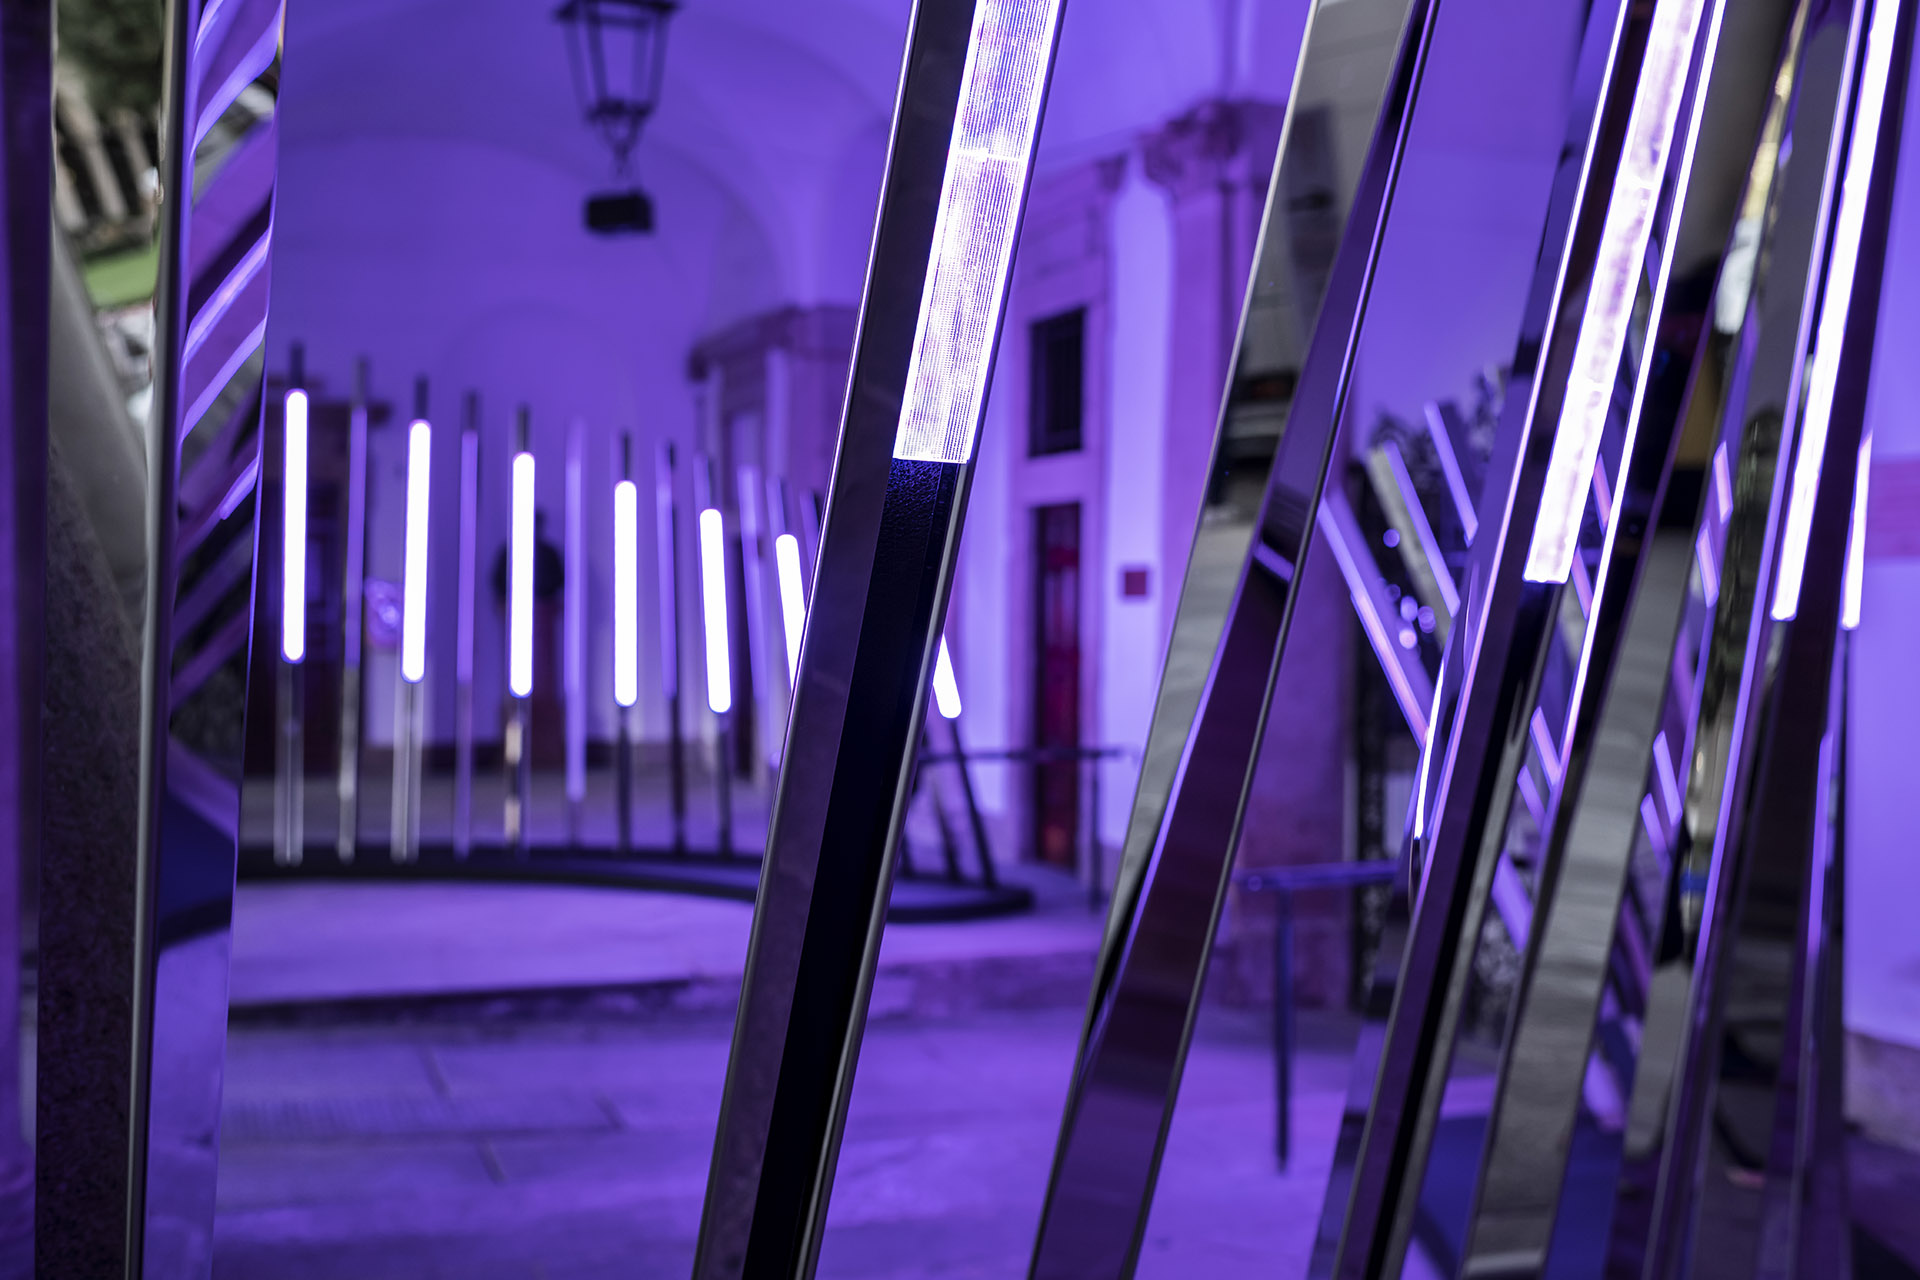 Transsensorial Gateway. An installation of light and sound designed to represent and stimulate human contact